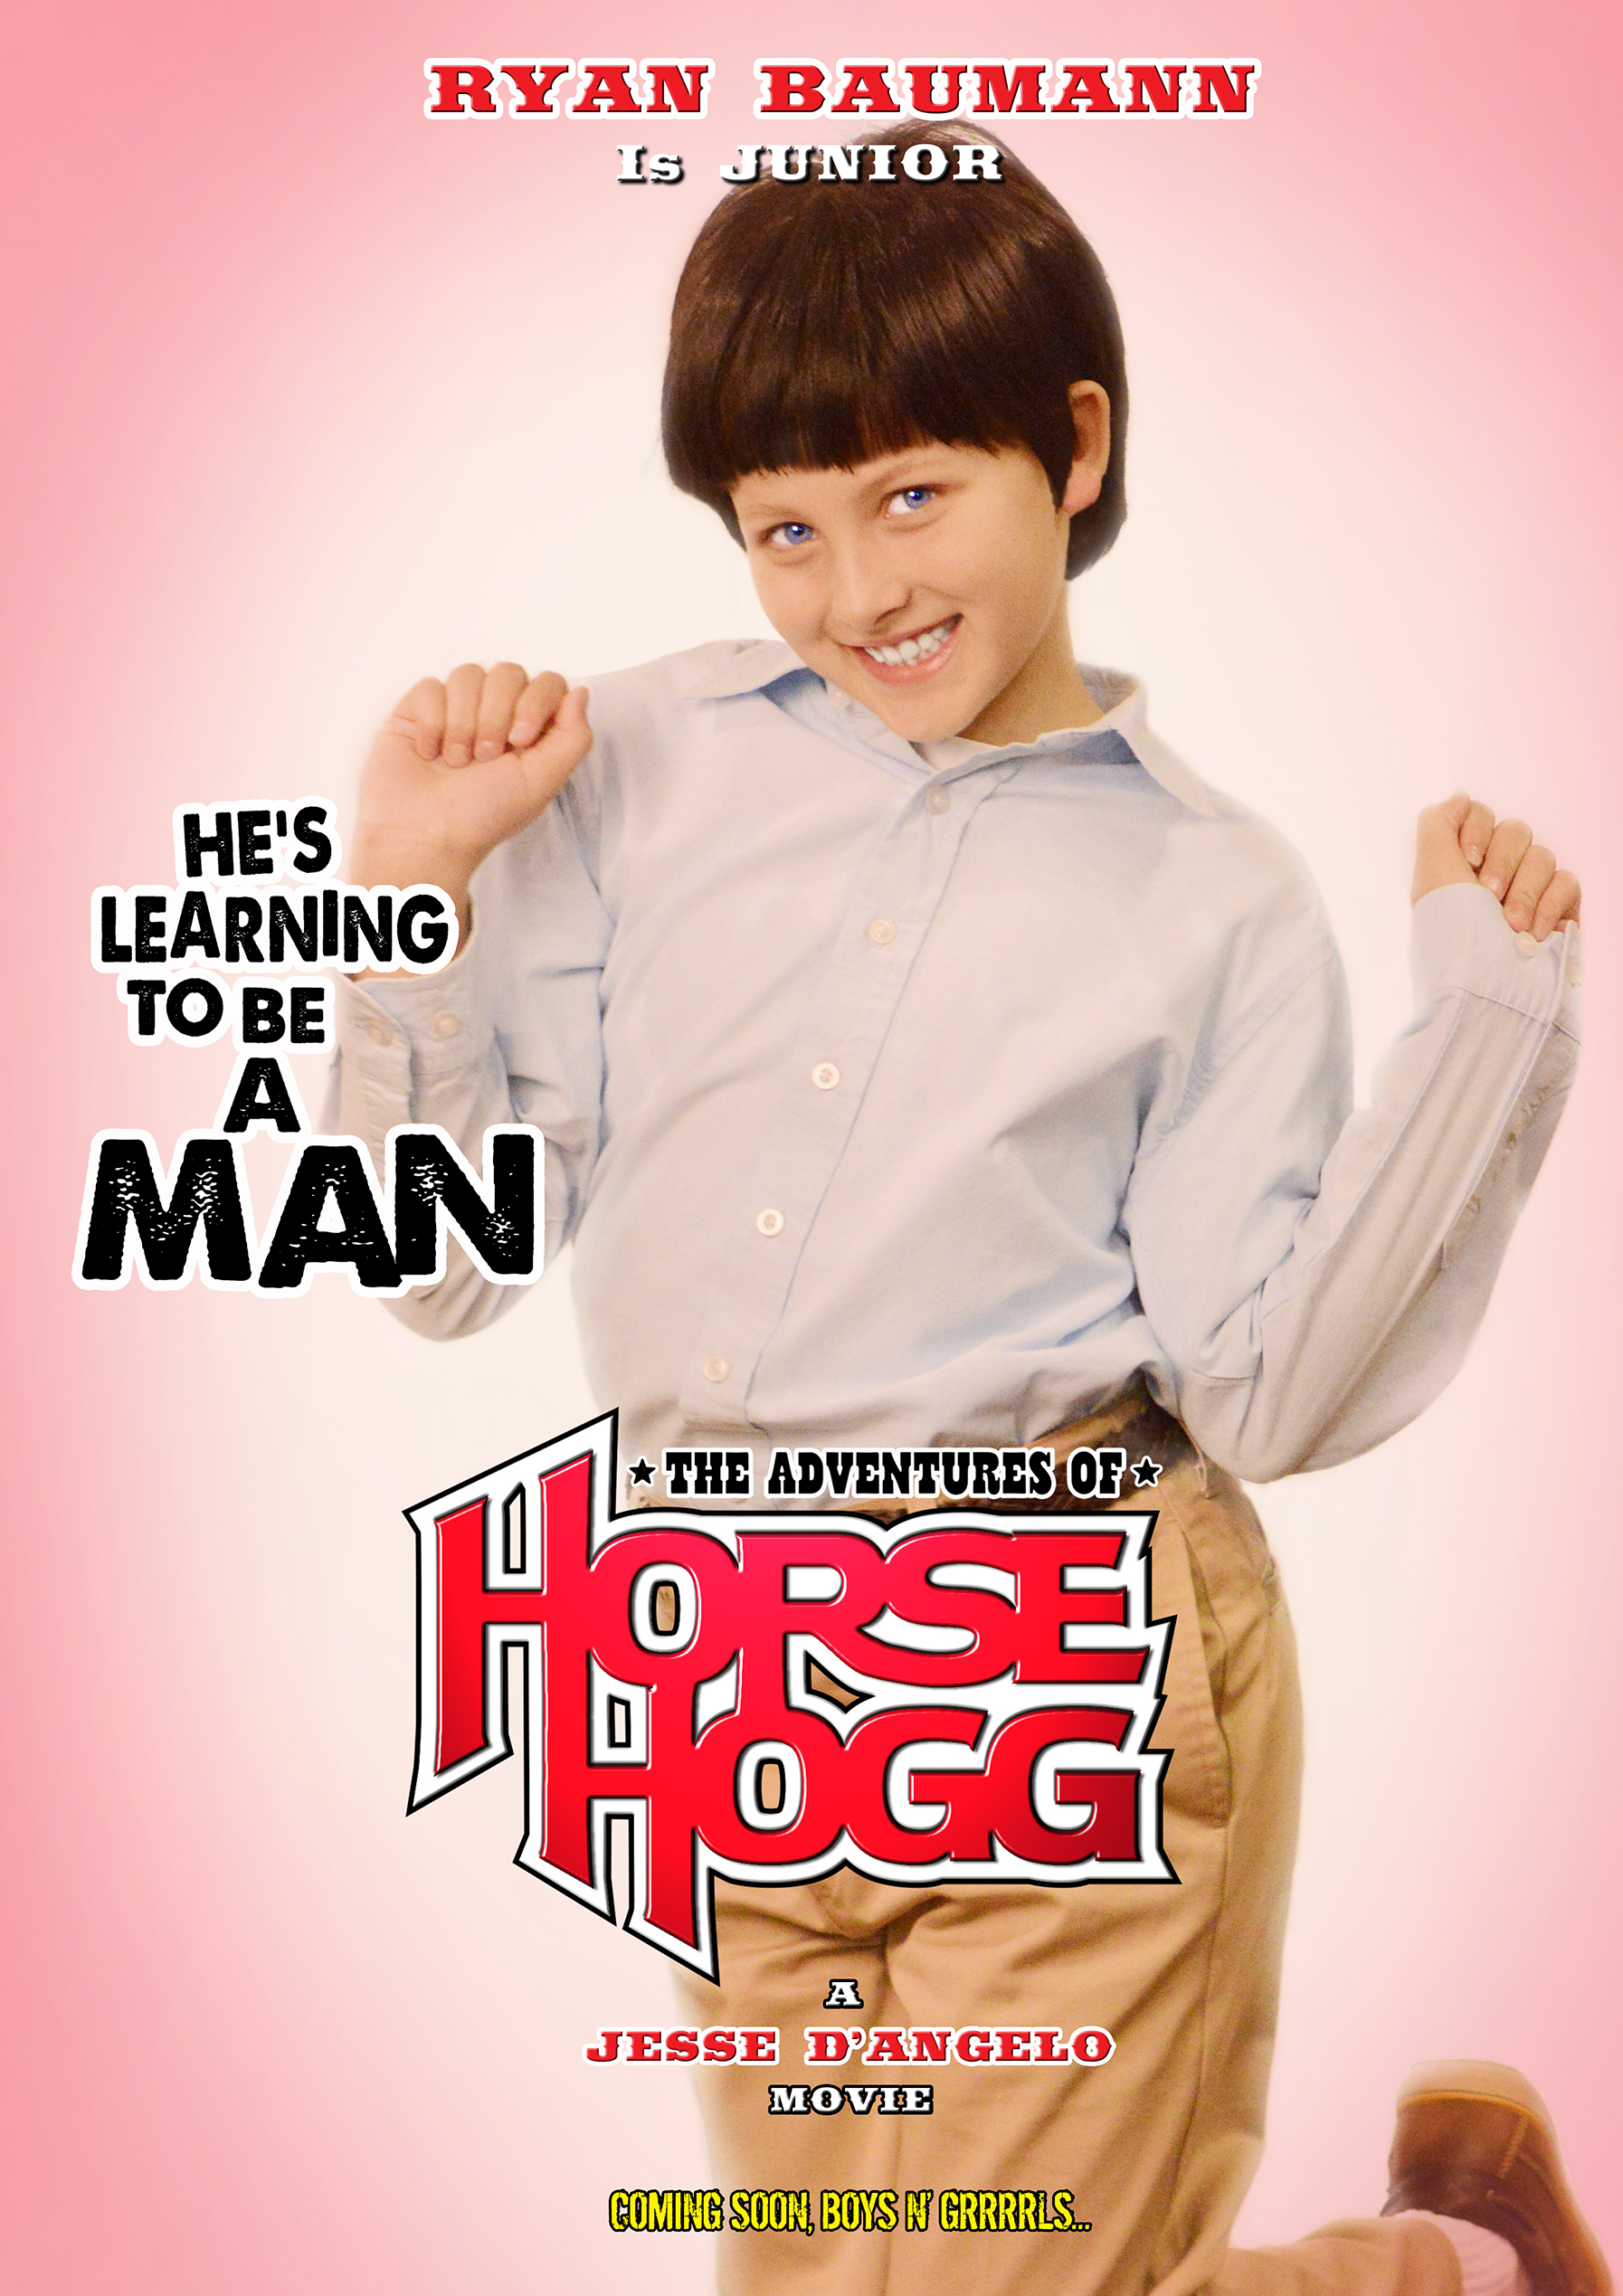 One of the character posters for The Adventures of HORSE HOGG (Oct. 2014)... Co-starring Ryan Baumann as 